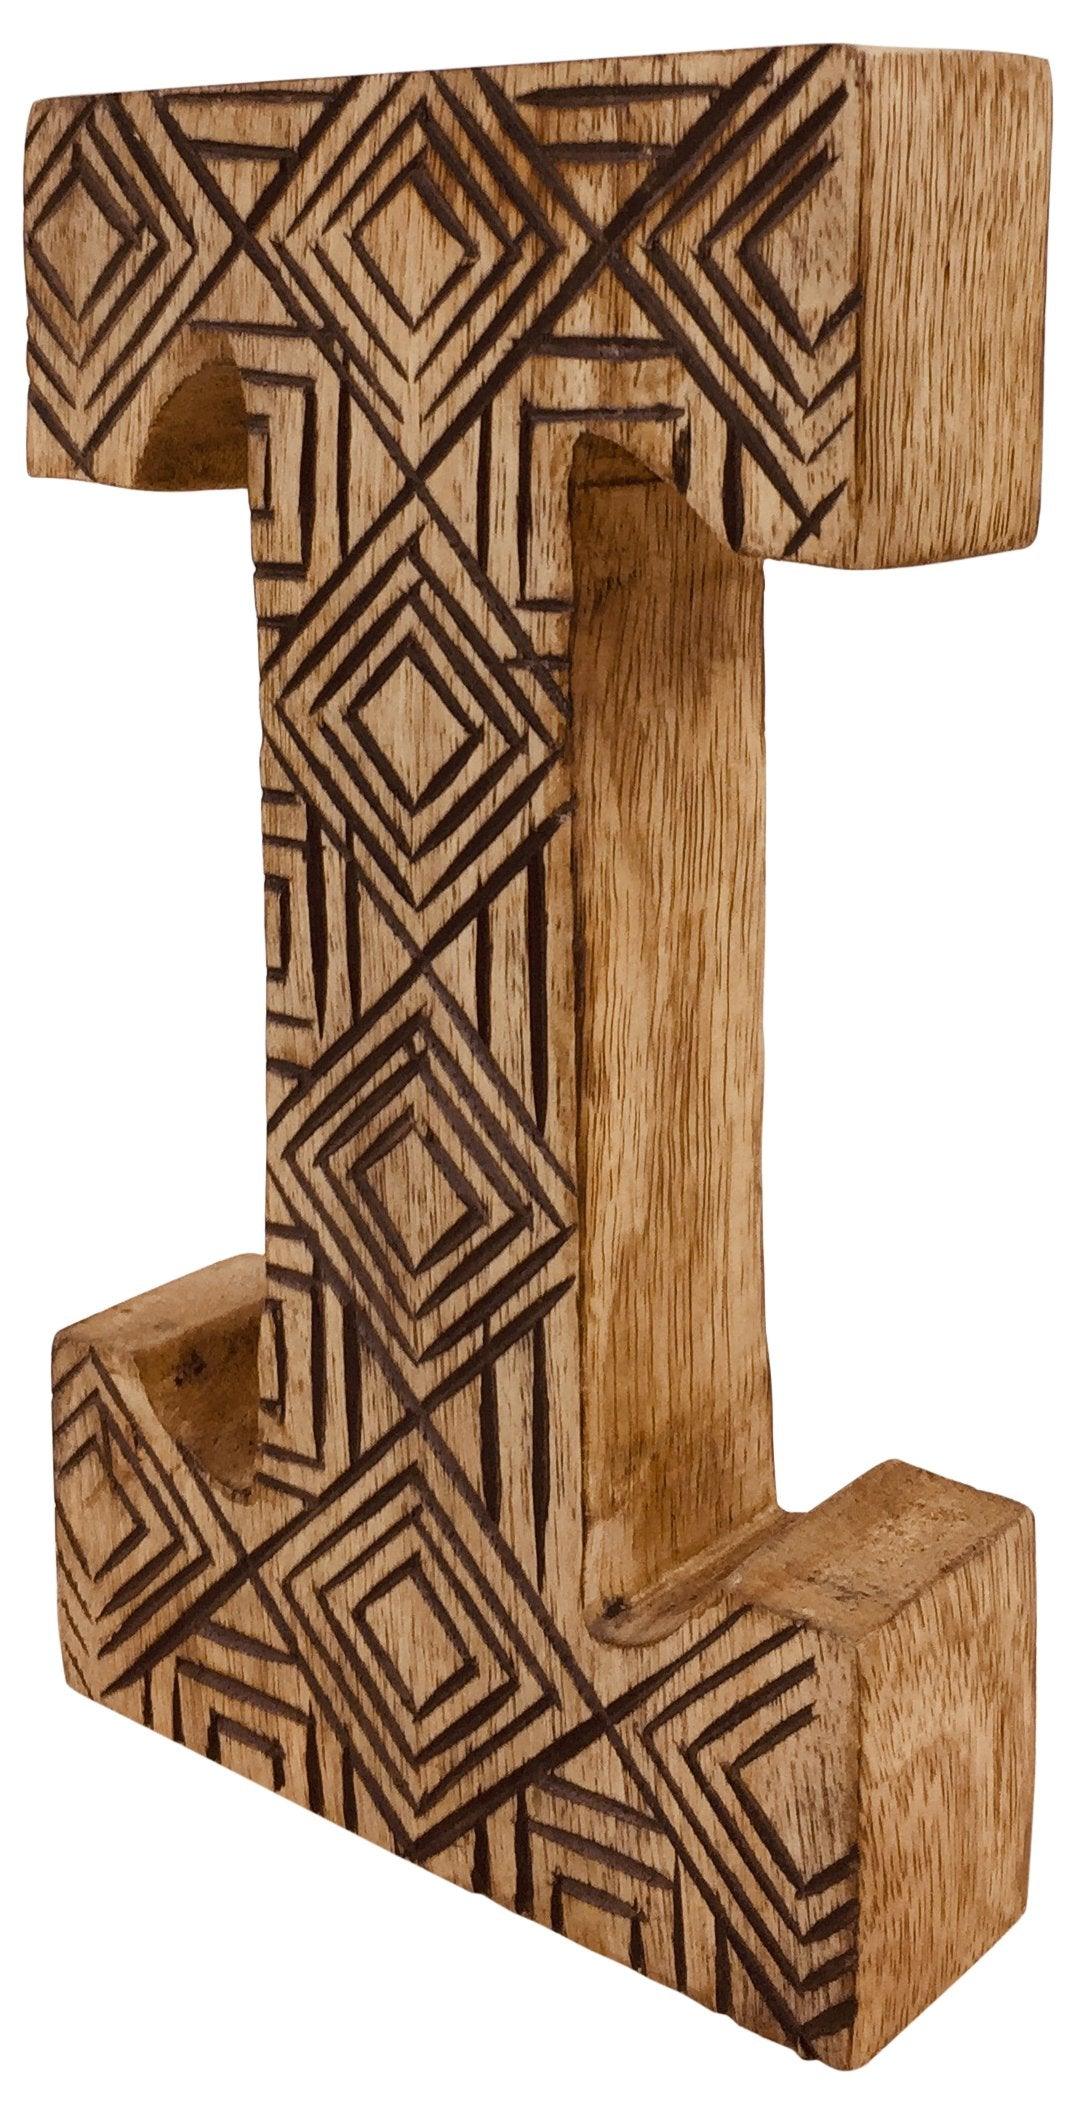 View Hand Carved Wooden Geometric Letter I information